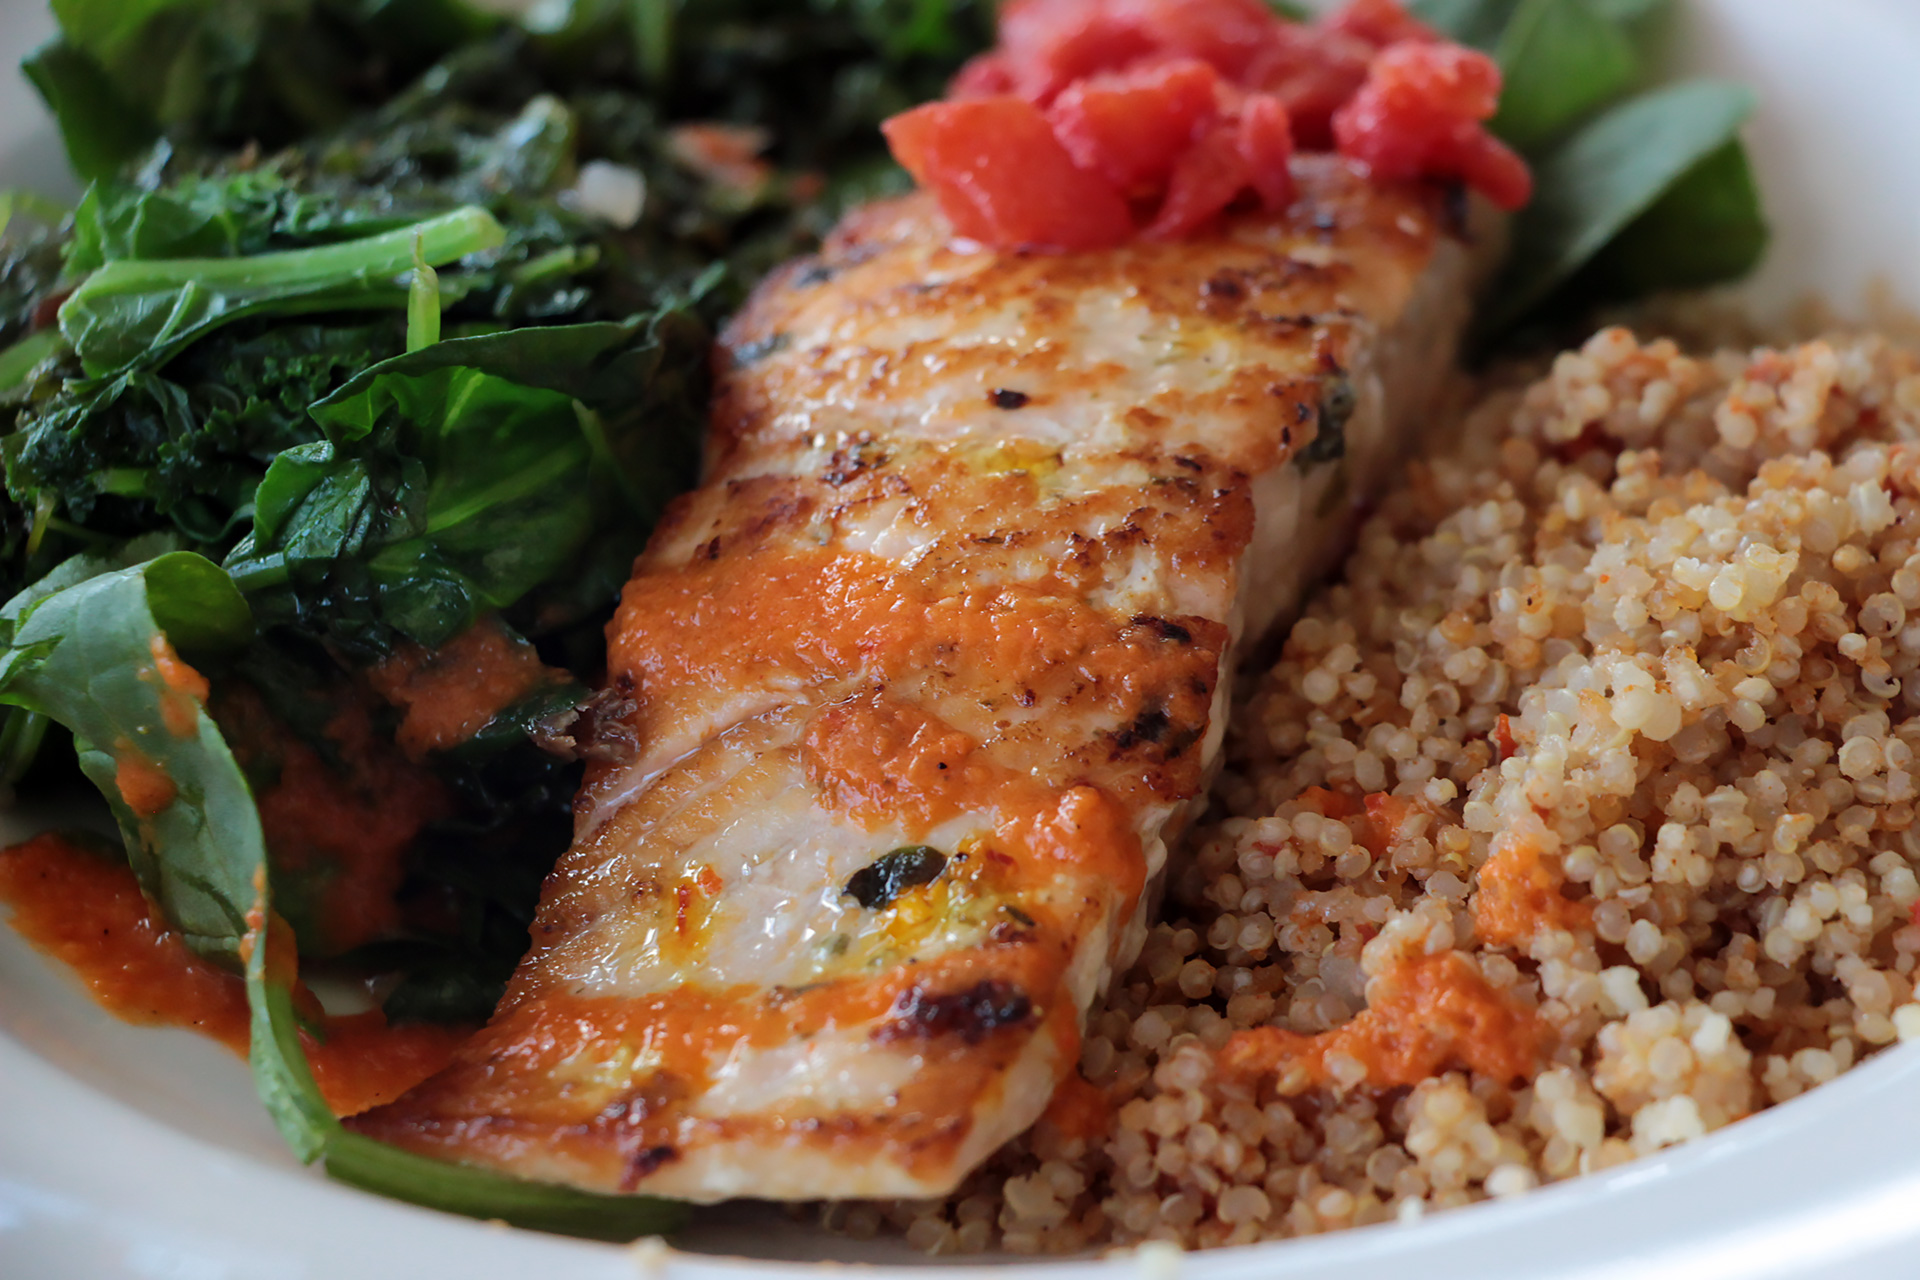 Wild salmon comes simply with quinoa and cooked spinach.